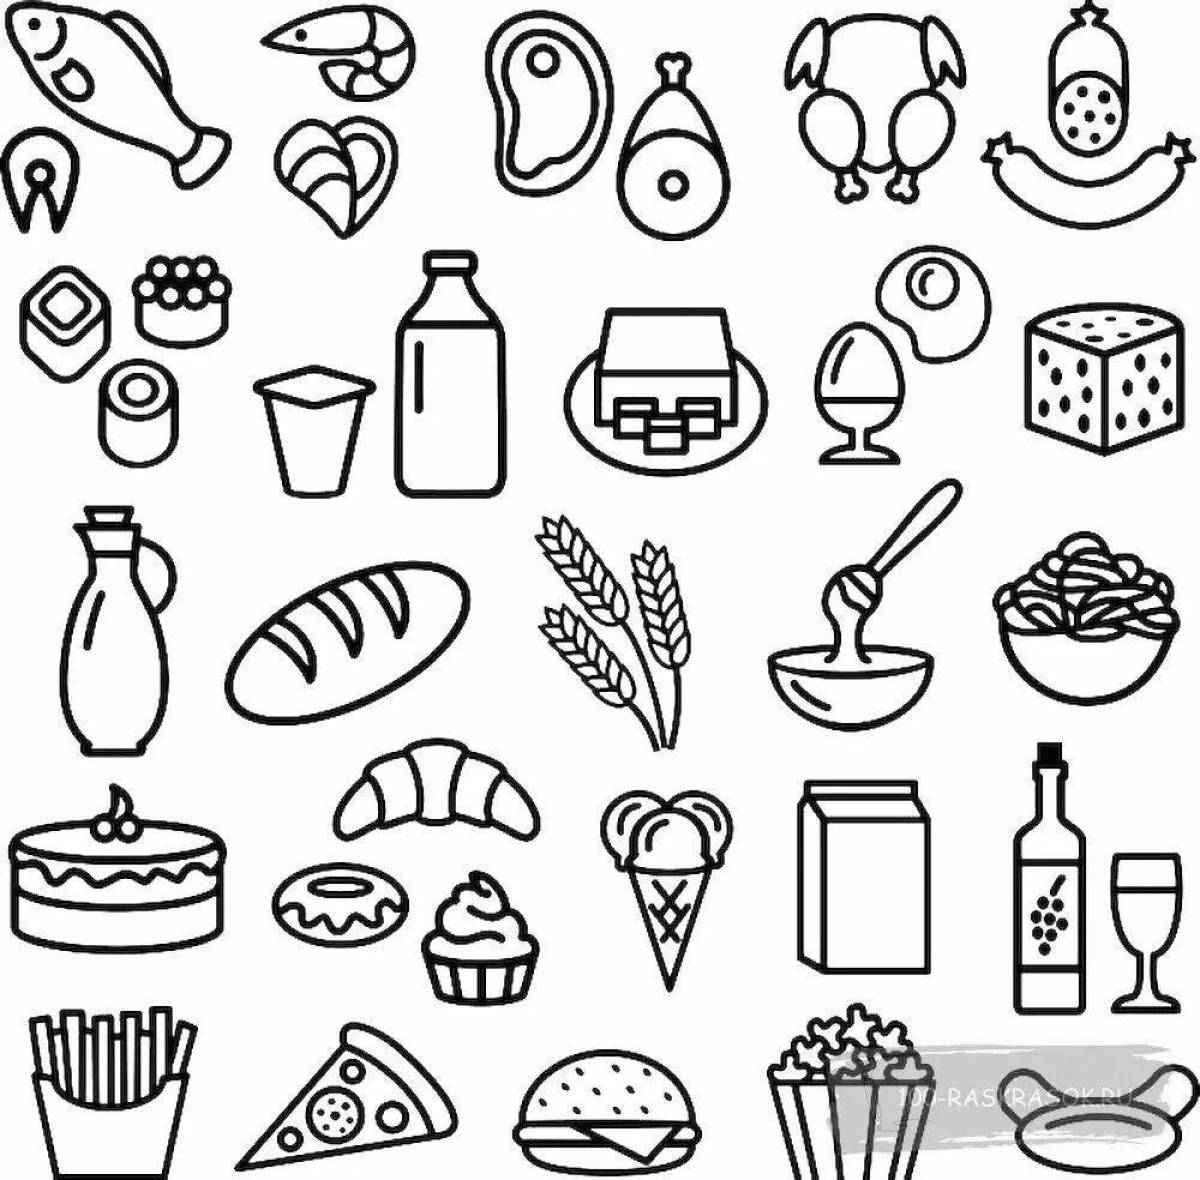 Coloring page food for dolls